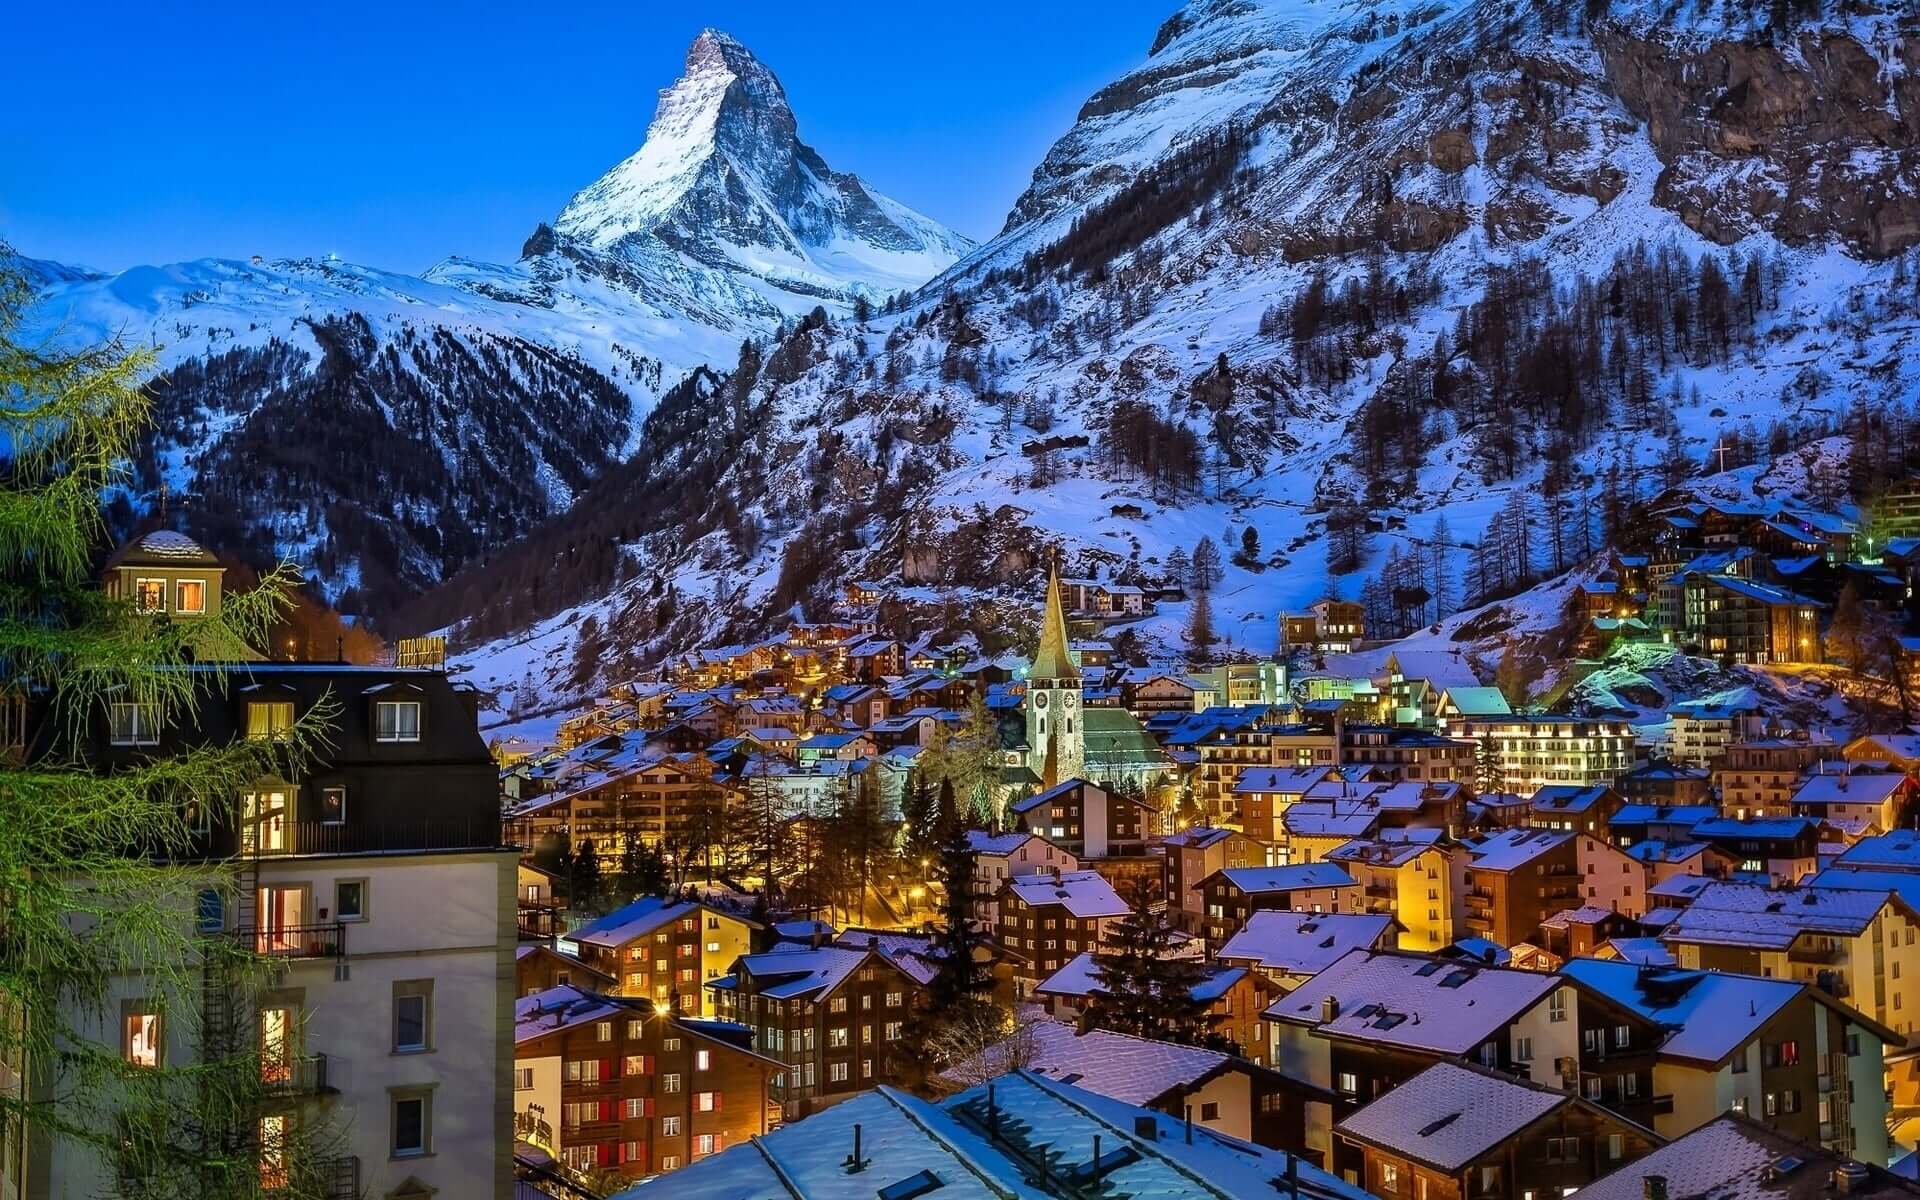 A beautiful city in the snowy mountains with lights glowing in the houses.